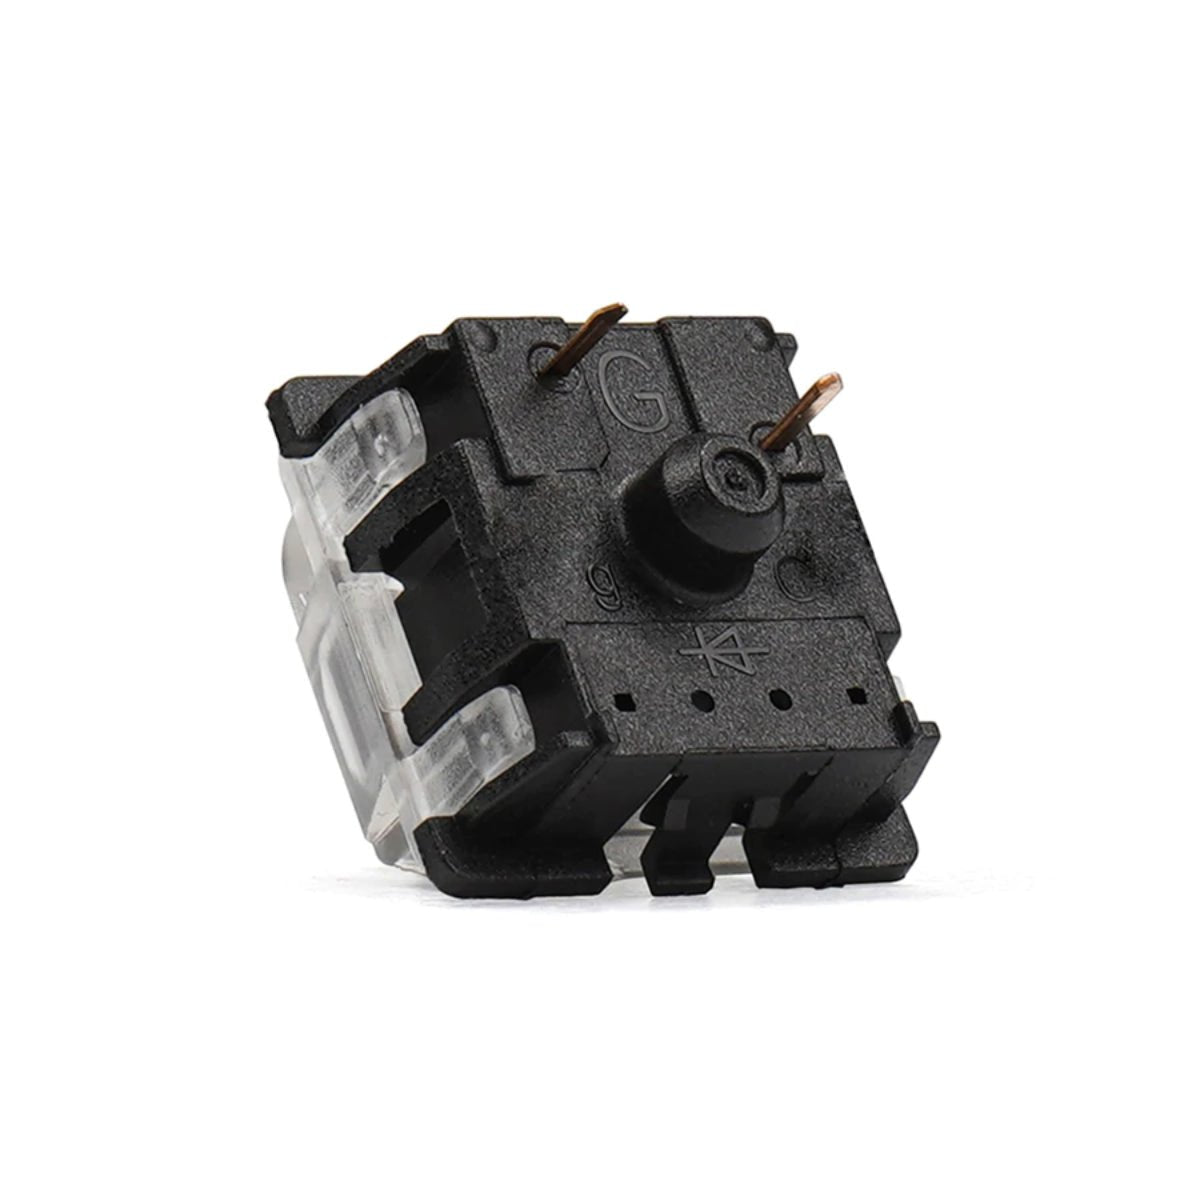 KBD Fans Gateron Tactile Switches 3 pin - Blue - Store 974 | ستور ٩٧٤